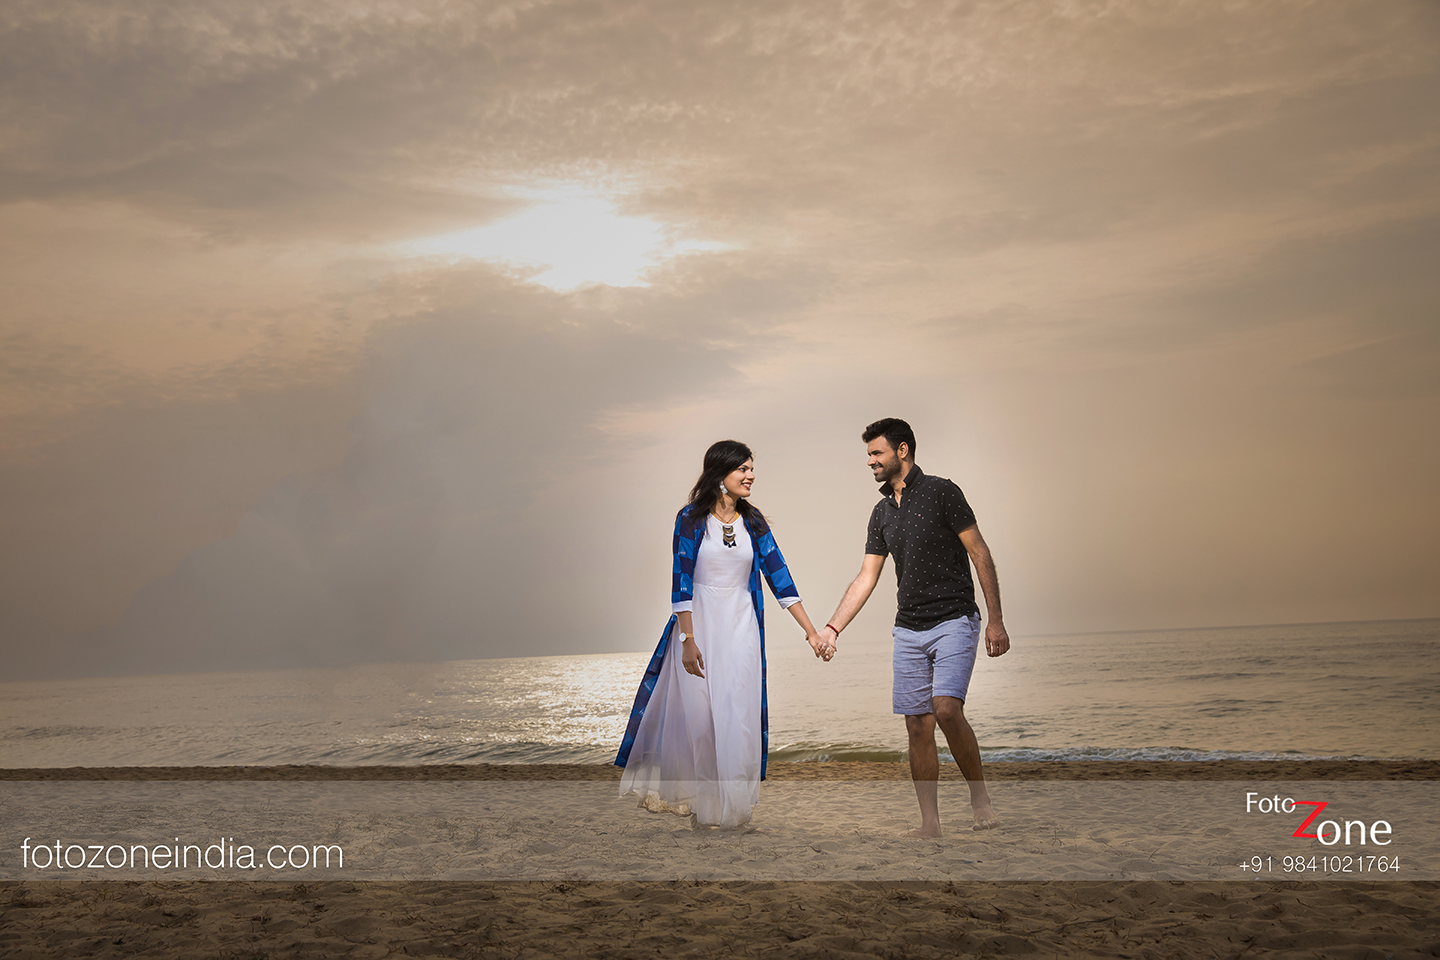 Our wish, our photos': Couple abused and trolled for viral wedding shoot  respond